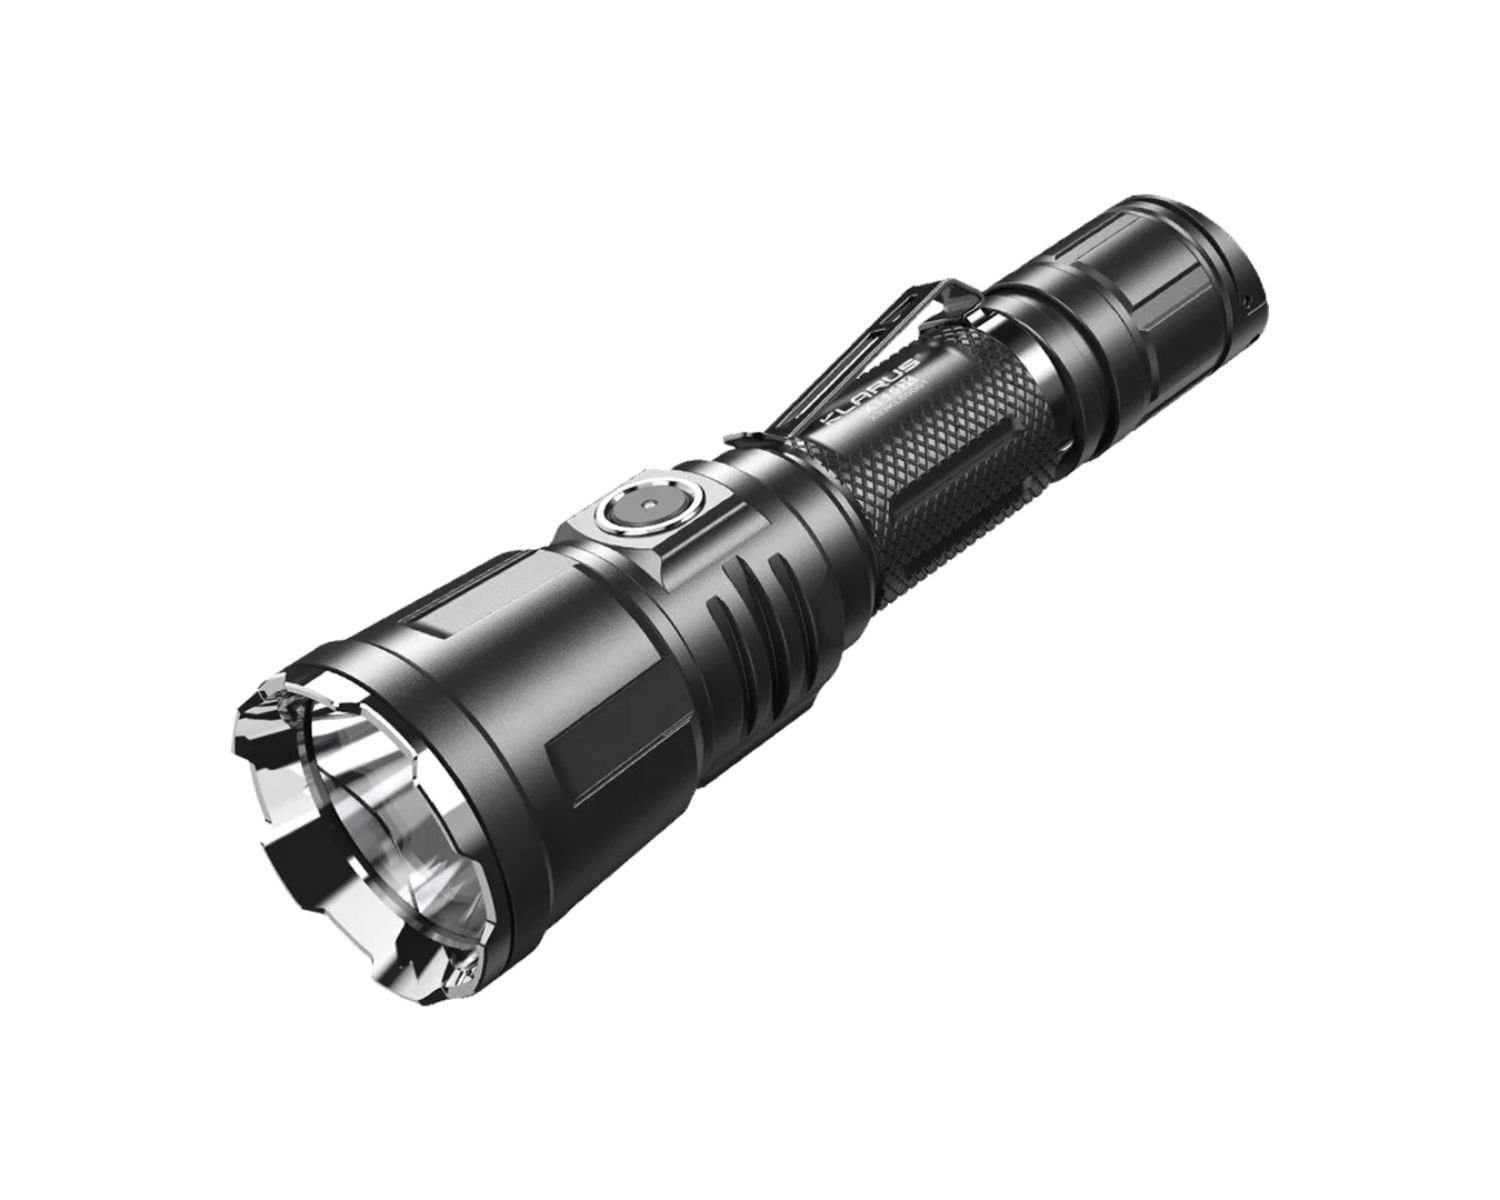 Tactical Flashlight Review: Shedding Light on the Best Options